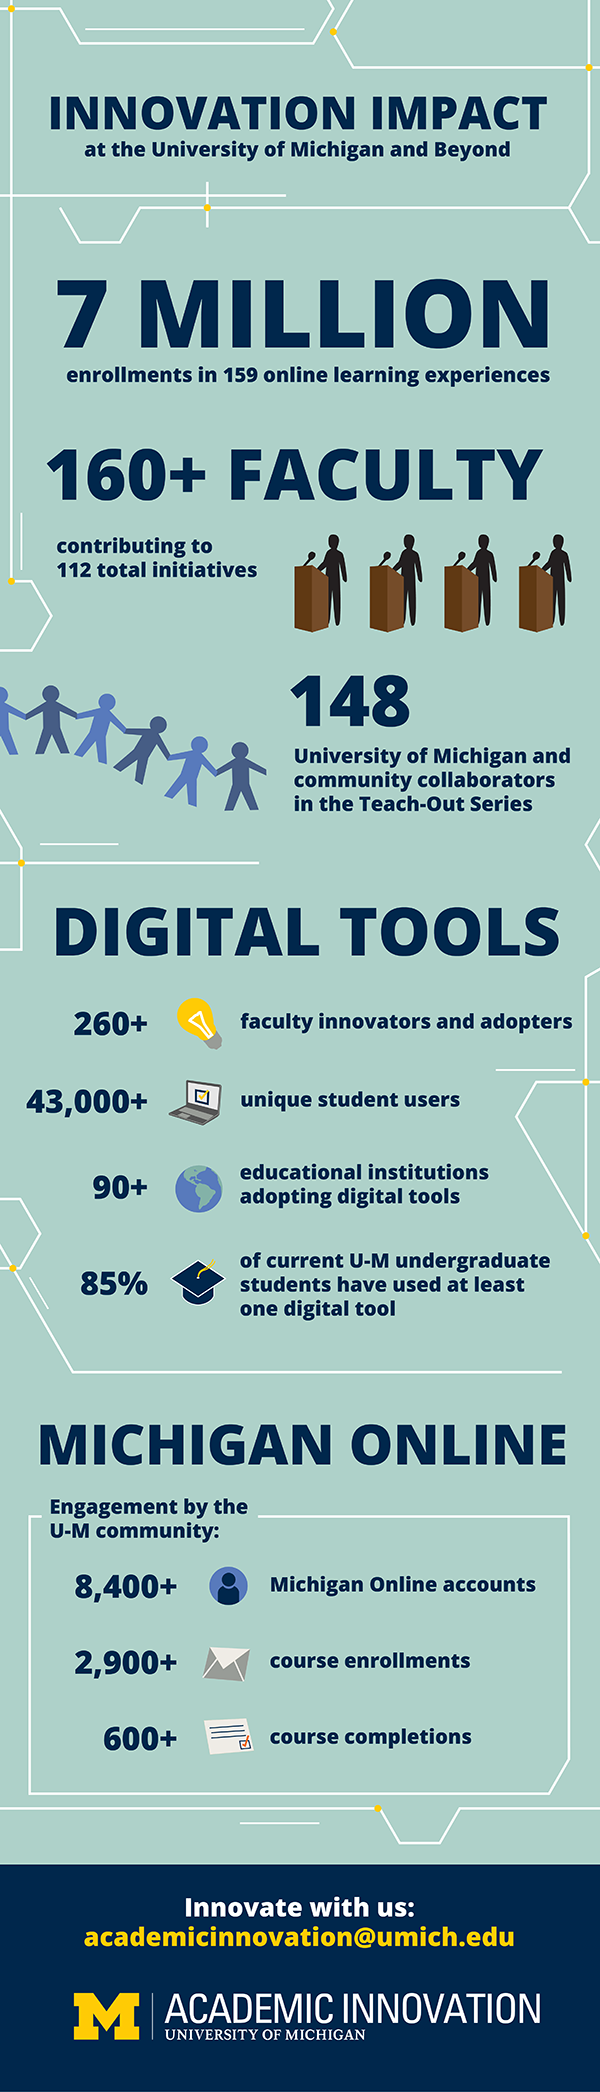 An illustrated infographic titled “Innovation Impact at the University of Michigan and Beyond” including the following data points: 7 Million enrollments in 159 online learning experiences. 160+ faculty contributing to 112 total initiatives. 148 University of Michigan and community collaborators in the Teach-Out series. Digital tools section: 260+ faculty innovators and adopters. 42,000+ unique student users. 90+ educational institutions adopting digital tools. 85% of current University of Michigan undergraduate students have used at least one digital tool. Michigan Online section: Engagement by the University of Michigan community: 8,400+ Michigan Online accounts. 2,900+ course enrollments. 600+ course completions. The end of the infographic reads: Innovate with us: academicinnovation@umich.edu. The University of Michigan Office of Academic Innovation logo is displayed below.